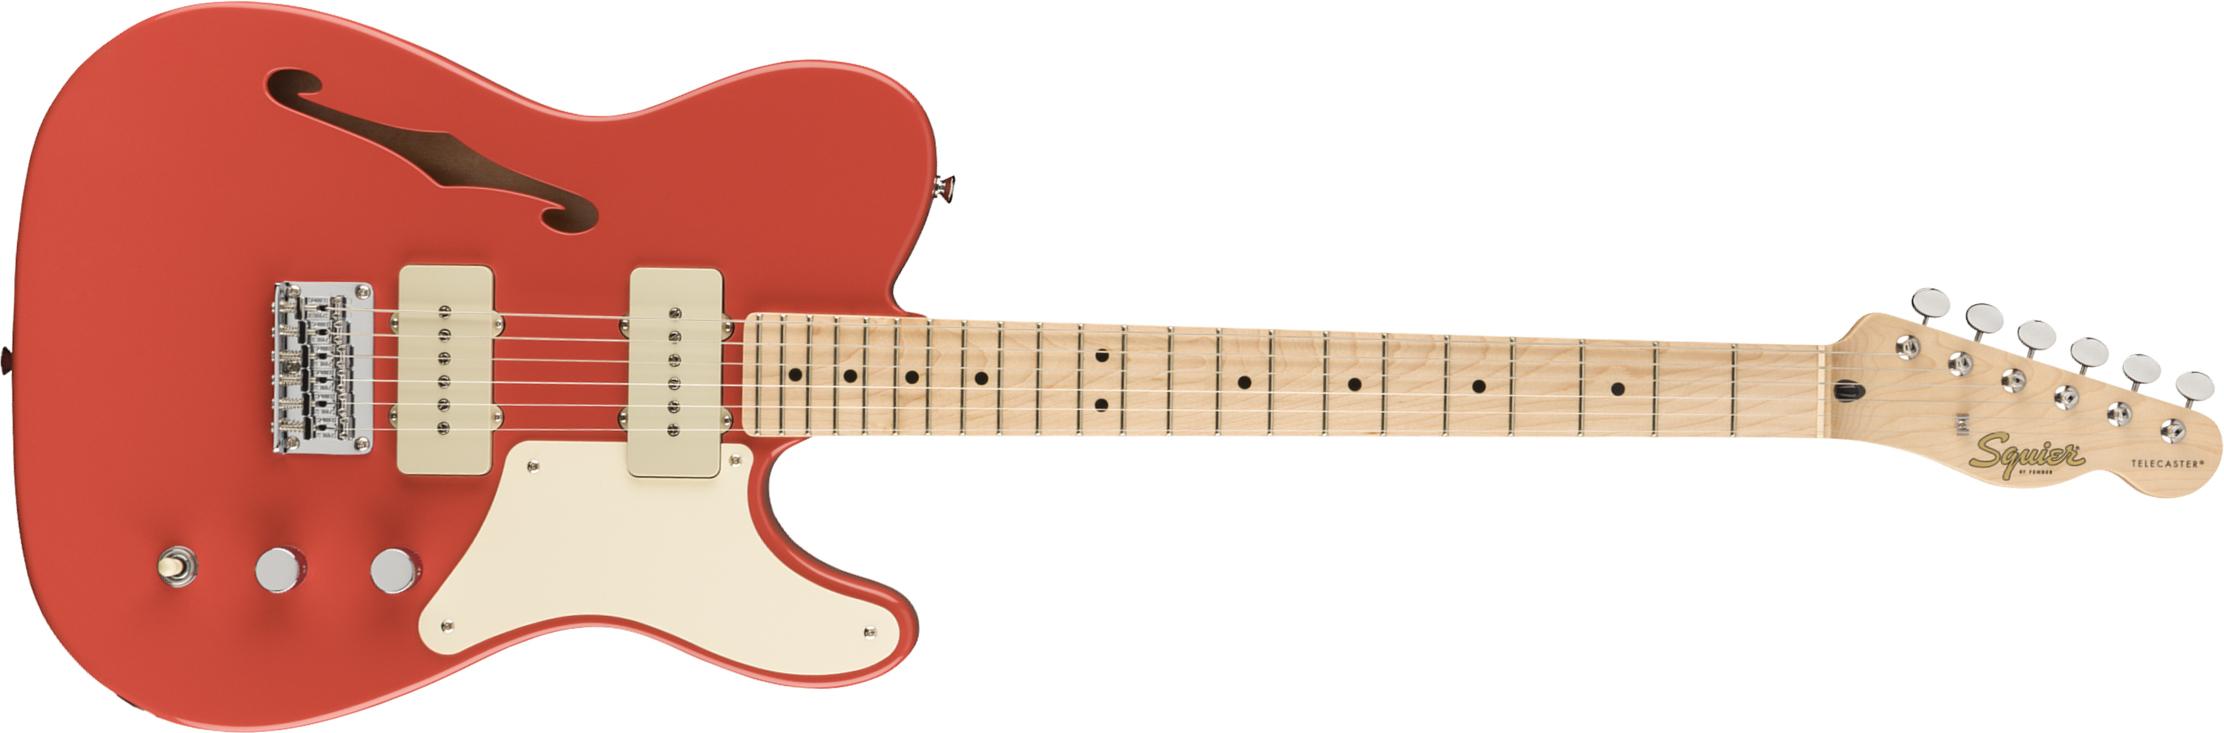 Squier Tele Thinline Cabronita Paranormal Ss Ht Mn - Fiesta Red - Semi-hollow electric guitar - Main picture